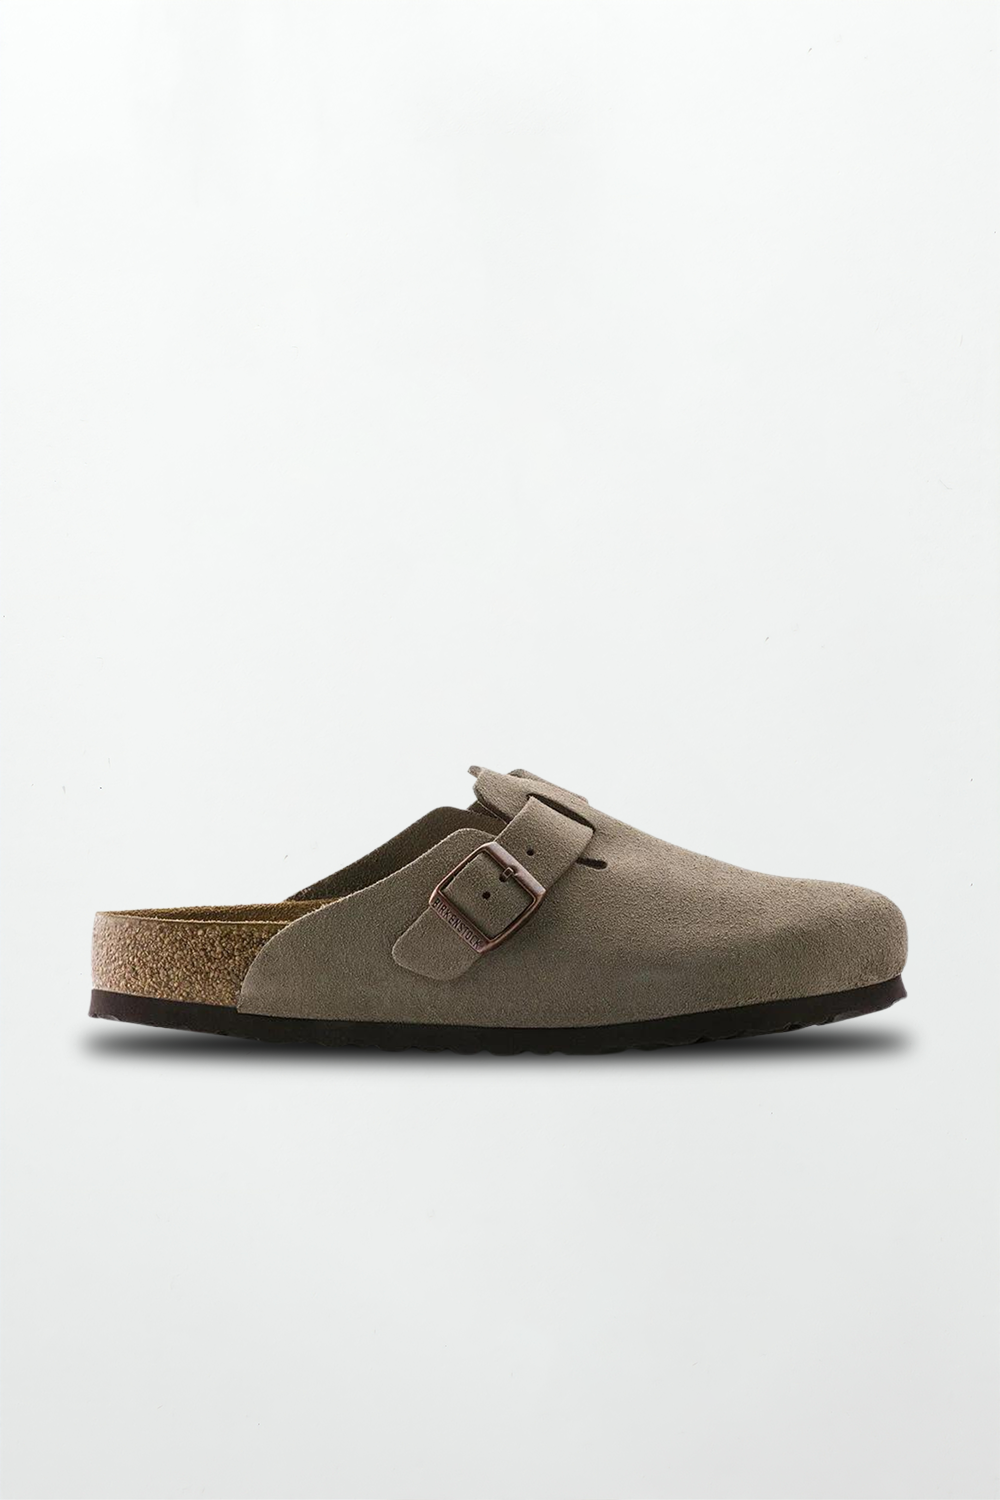 Boston Suede Leather in Taupe (Soft Footbed)